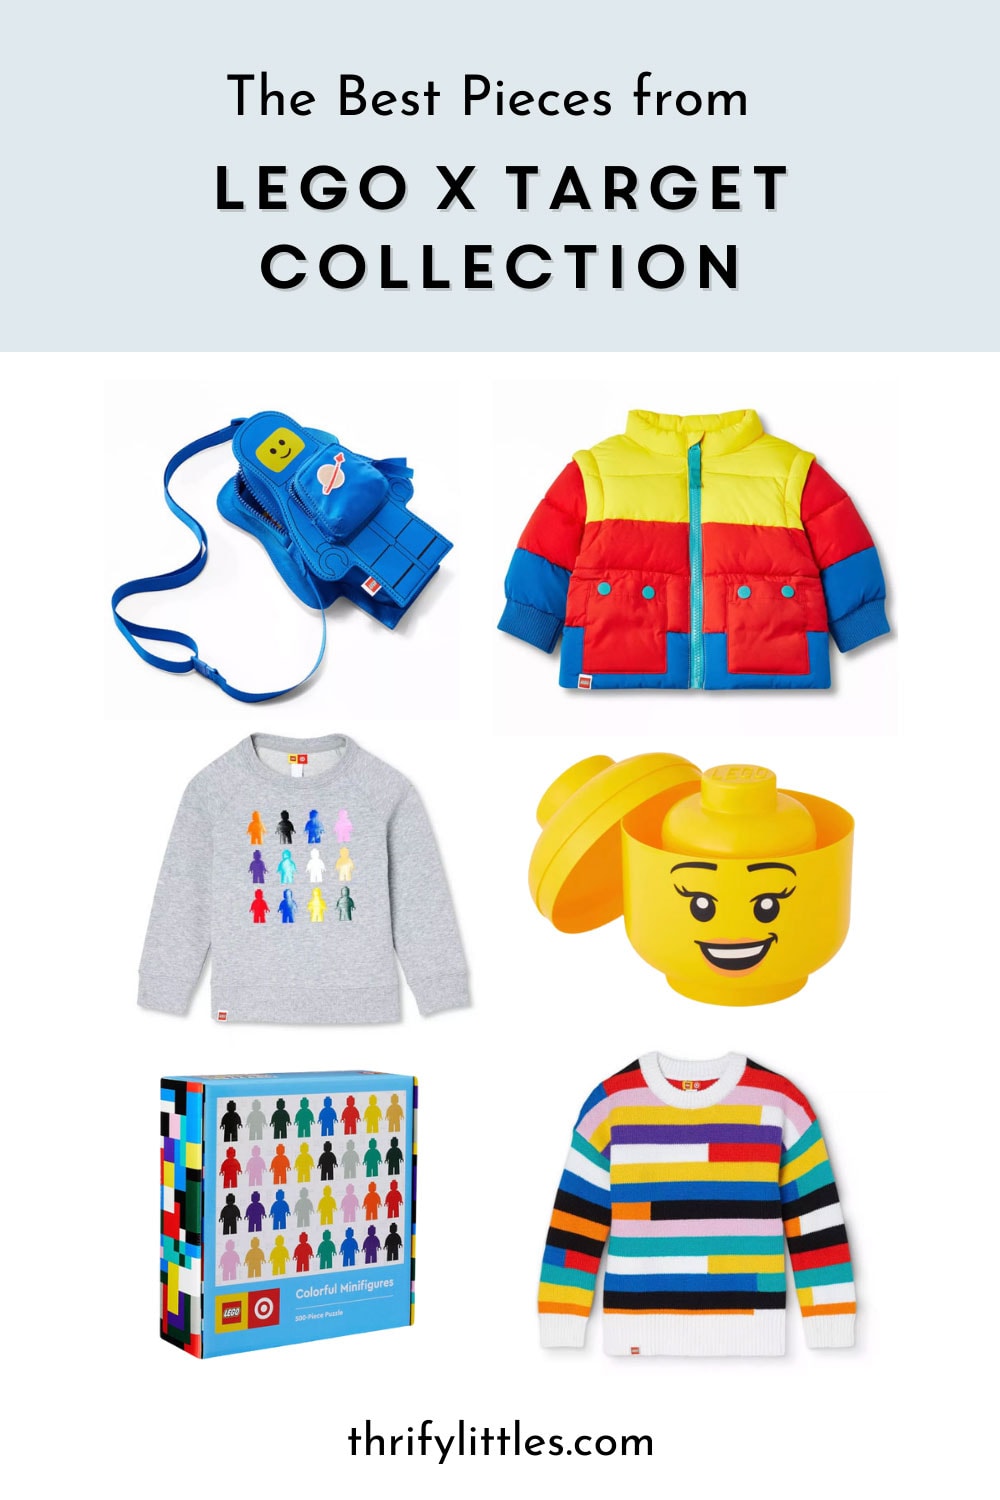 Coming Soon: Lego Collection x Target!